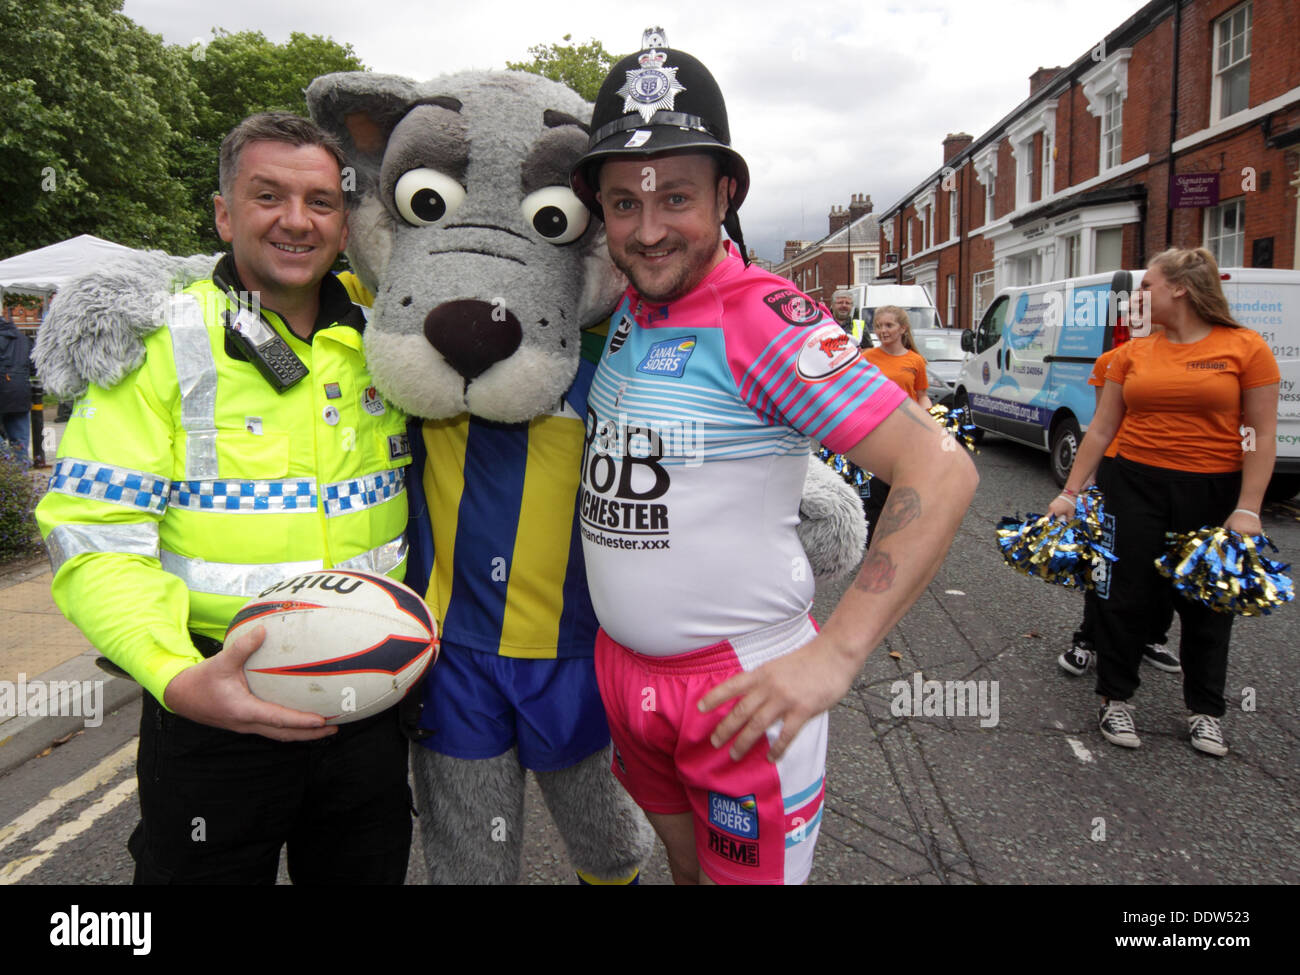 Warrington, Cheshire, UK. 7th September 2013. Warrington Wolves Wolfie aded to the fun at the successful LGBT pride event in the town centre. He brought some rugby fun to this annual event, attended by the 130th mayor of Warrington (Cllr Peter Carey). Credit:  Tony Smith/Alamy Live News Stock Photo